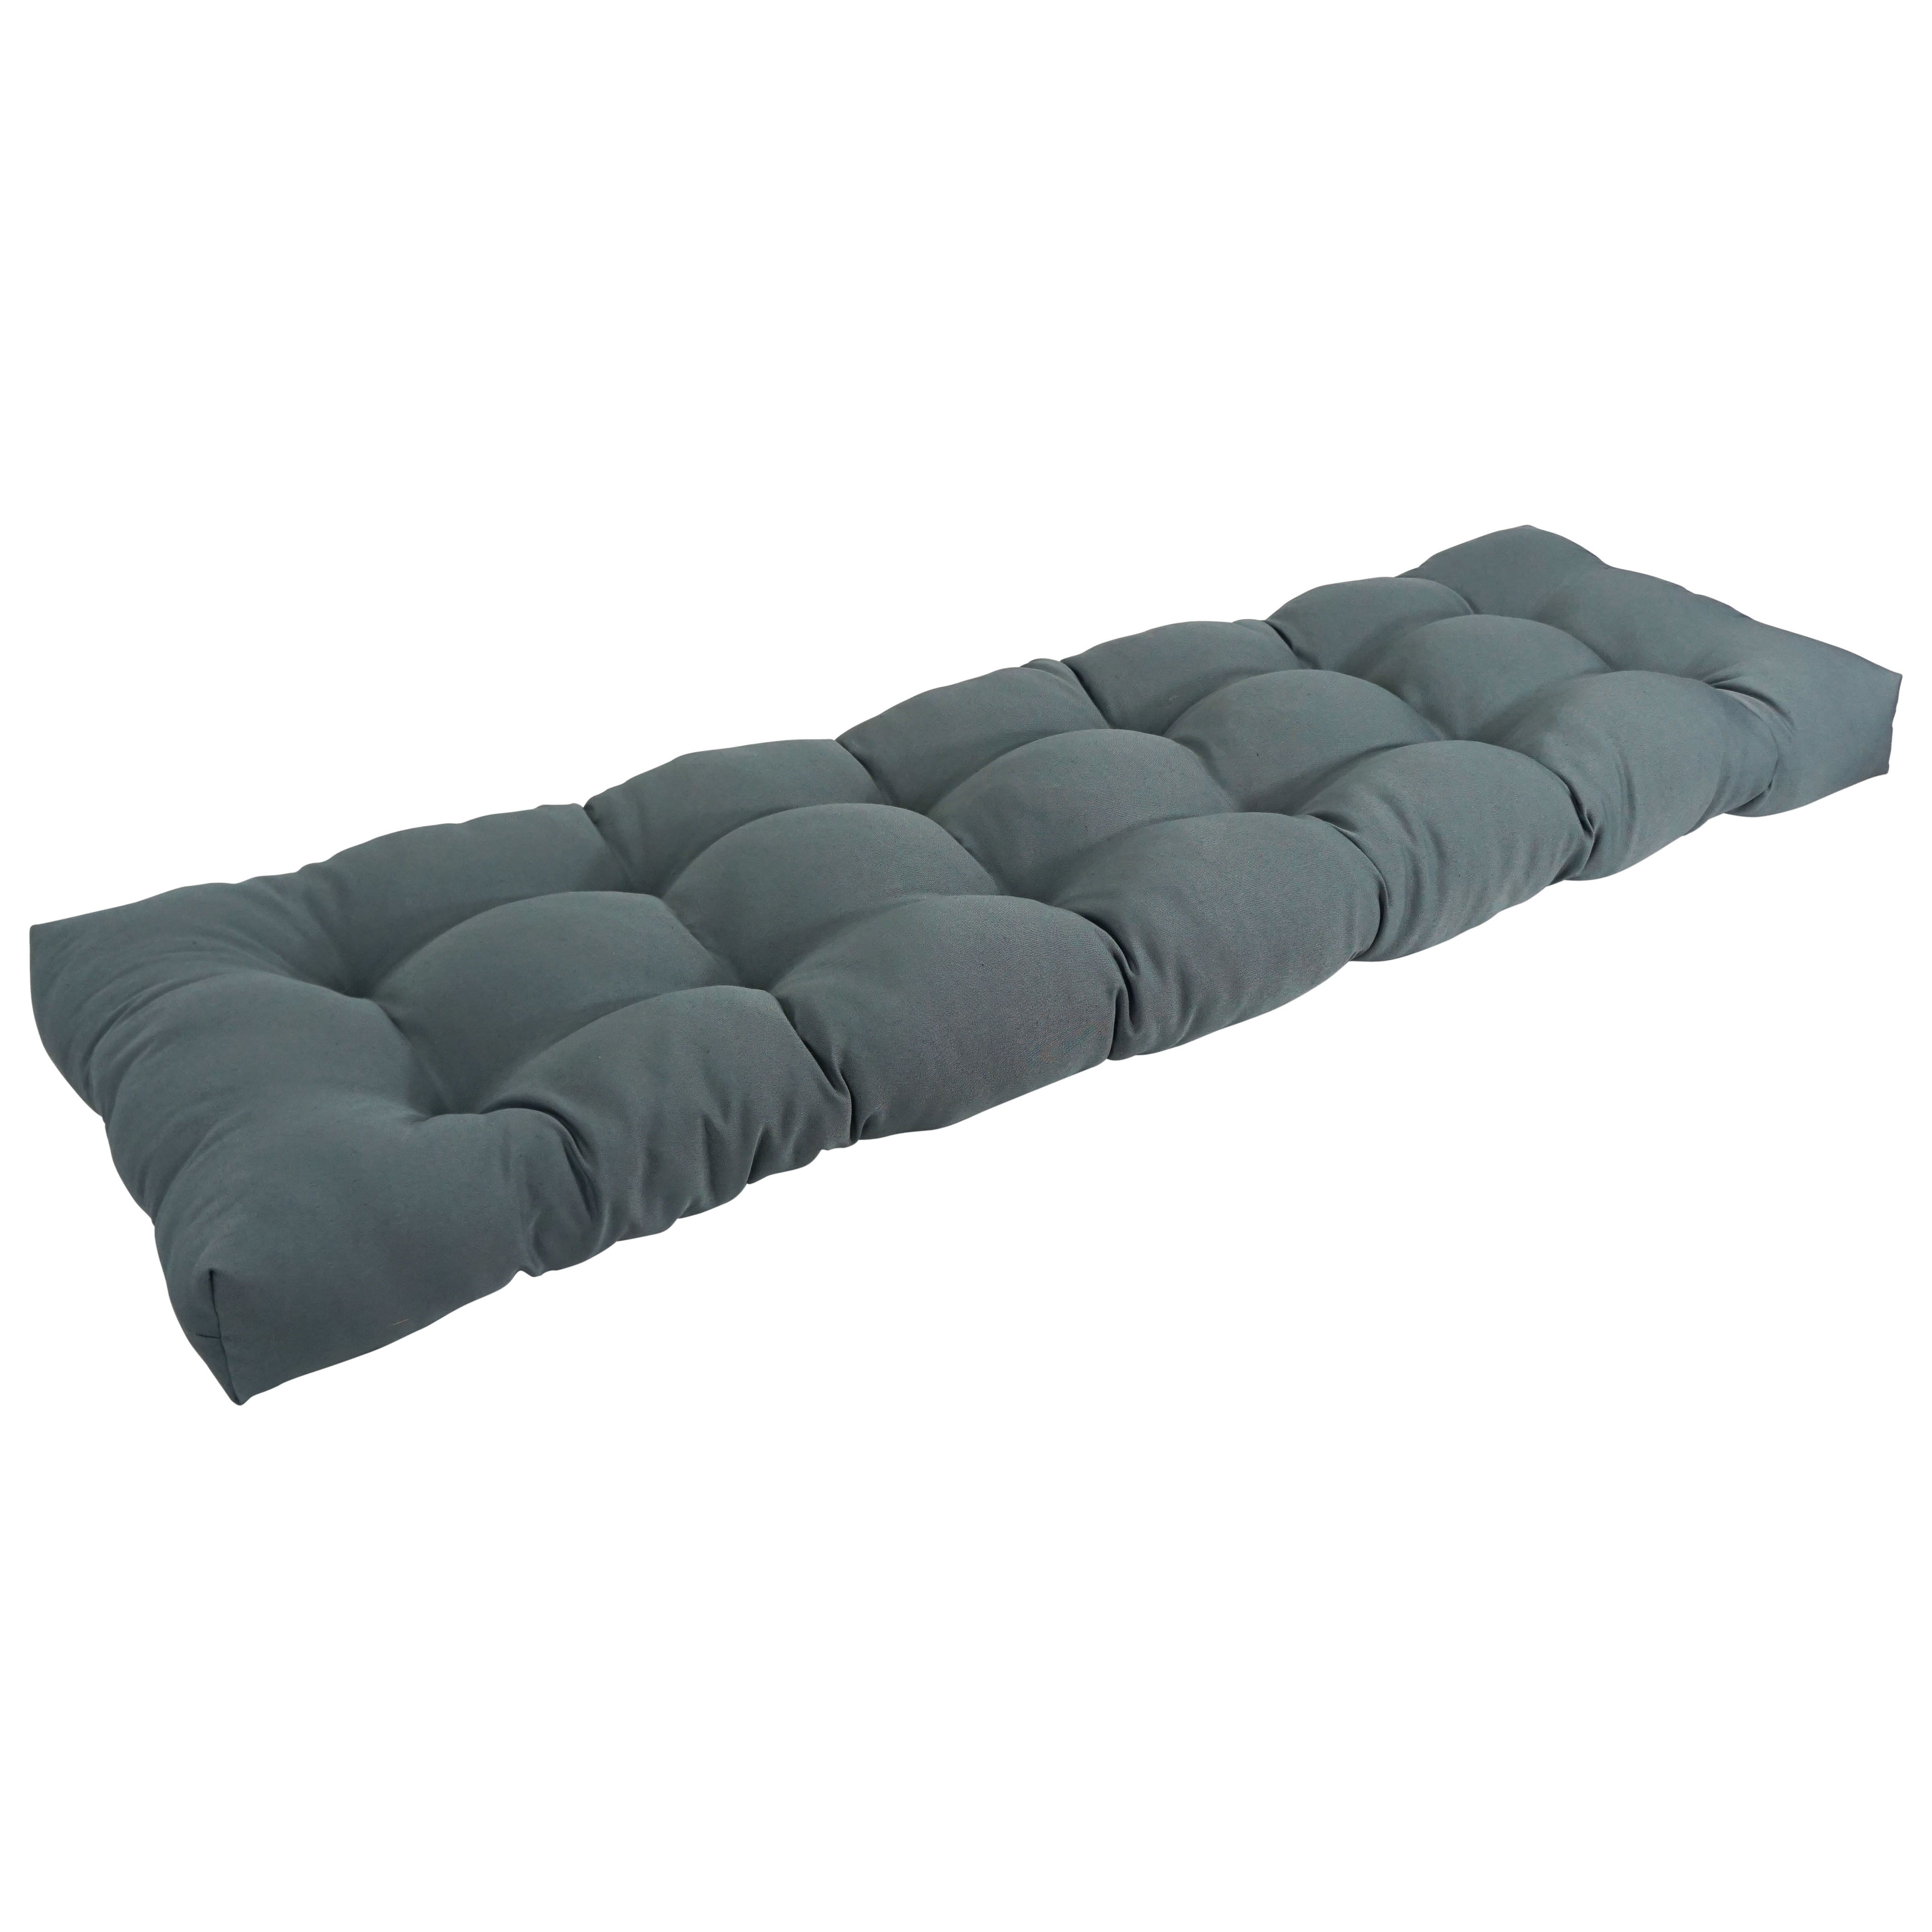 38 x 23 solid color grey Tufted bench cushion seat cushion,